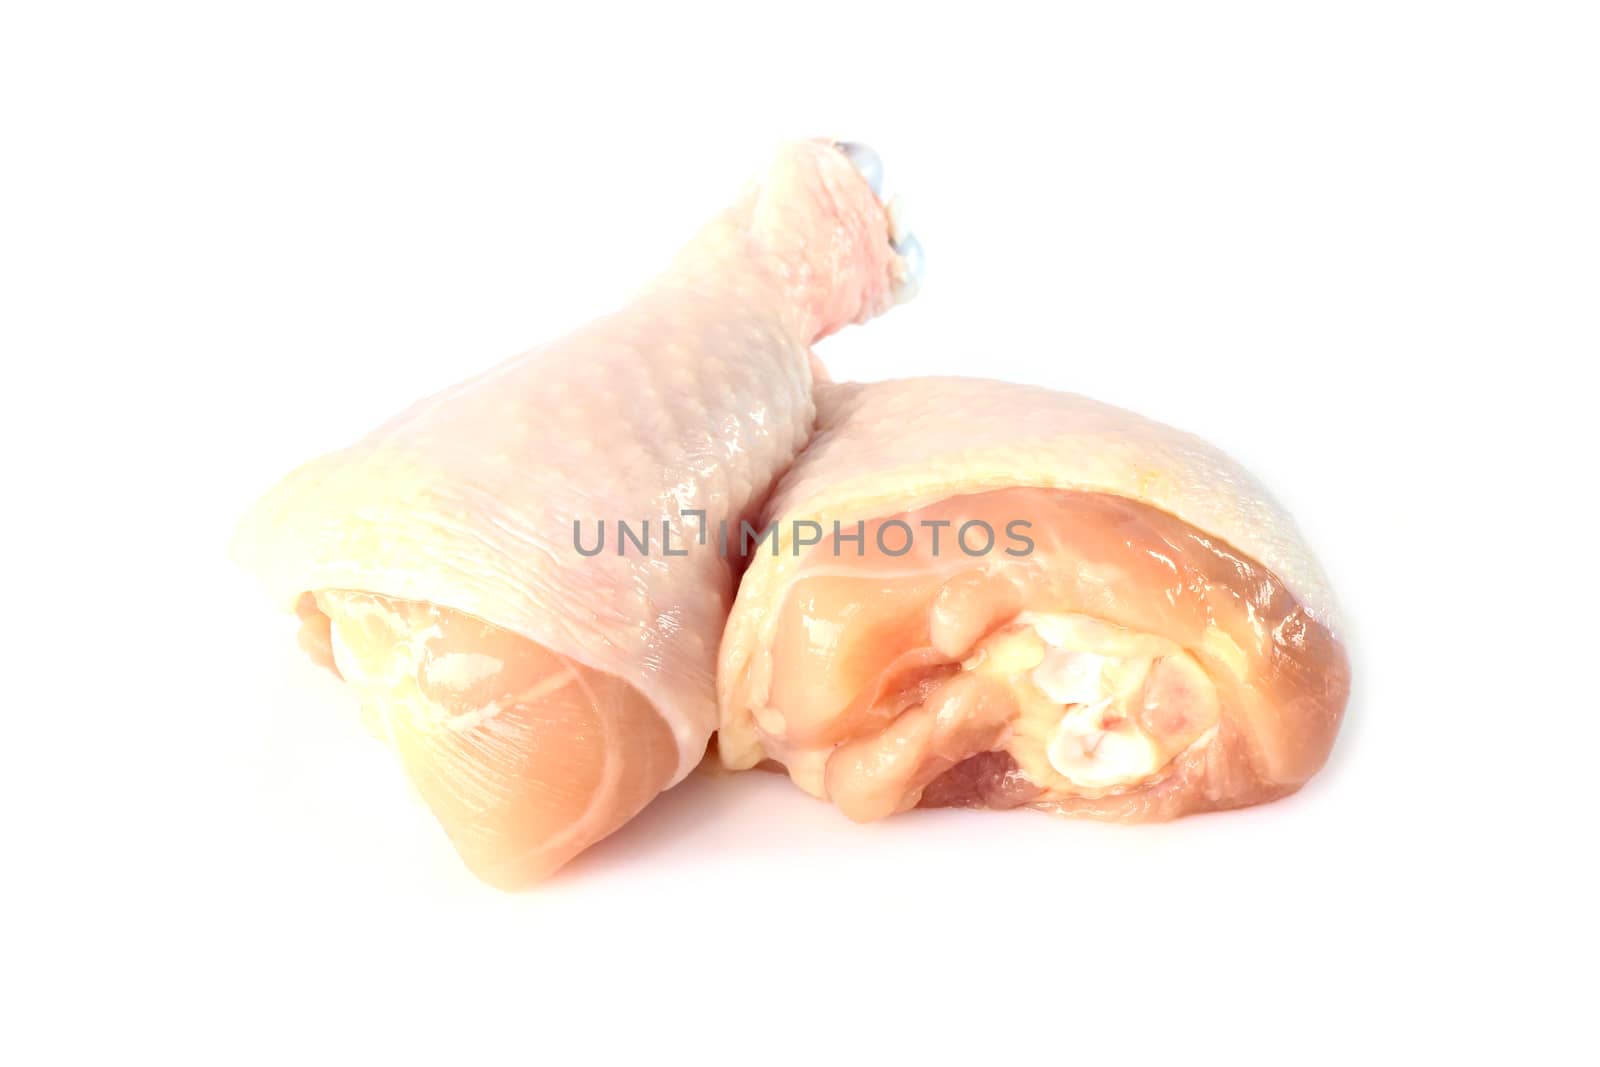 Image of Chicken Drumstick on a white background